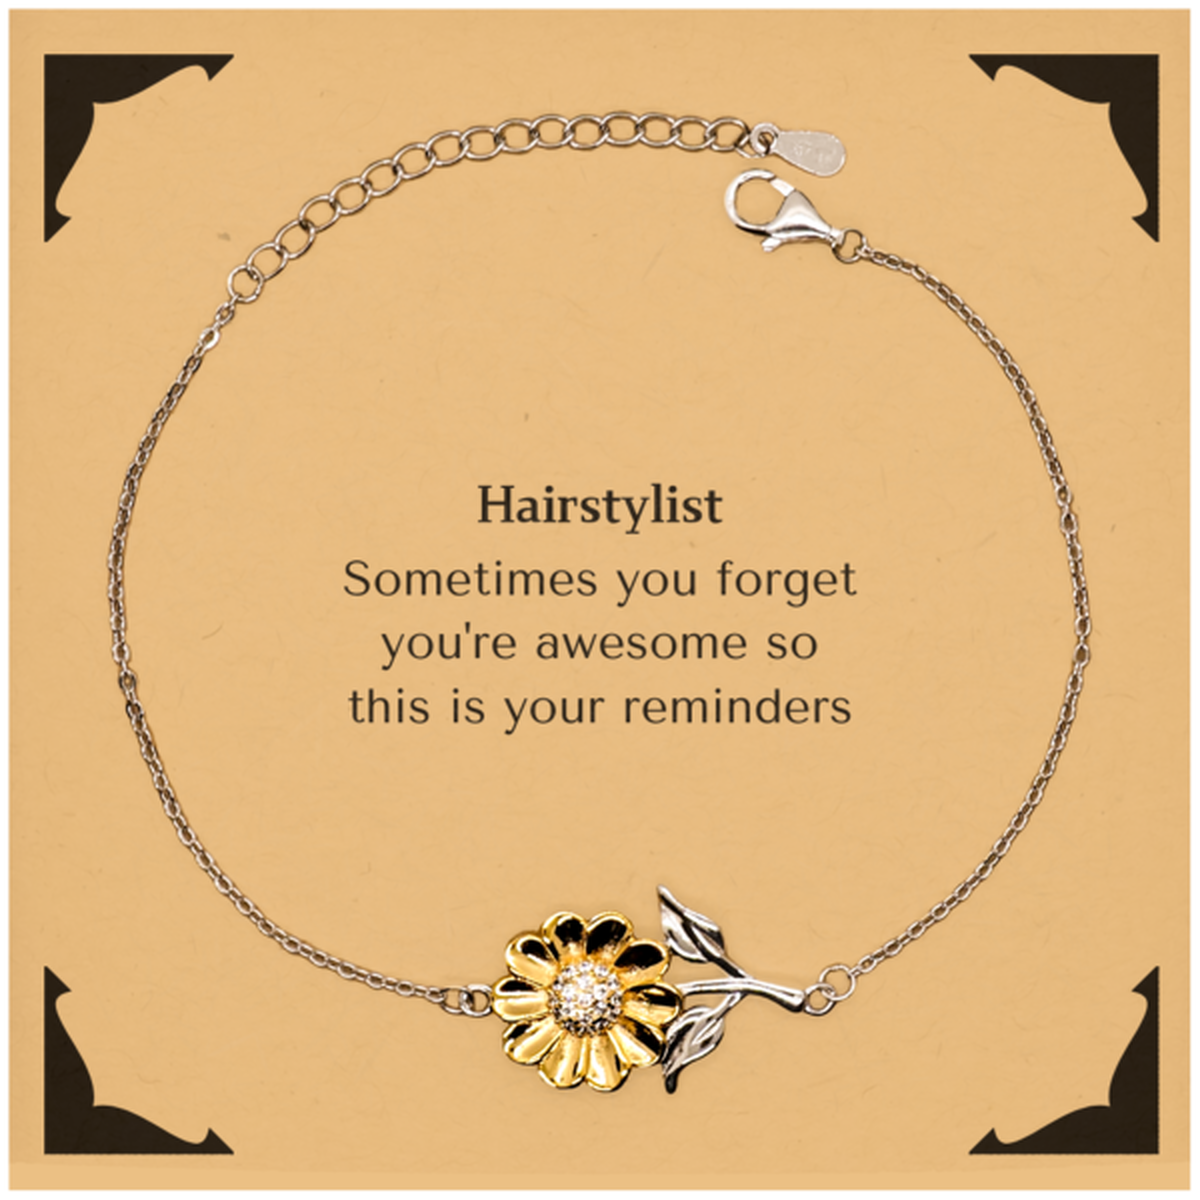 Sentimental Hairstylist Sunflower Bracelet, Hairstylist Sometimes you forget you're awesome so this is your reminders, Graduation Christmas Birthday Gifts for Hairstylist, Men, Women, Coworkers